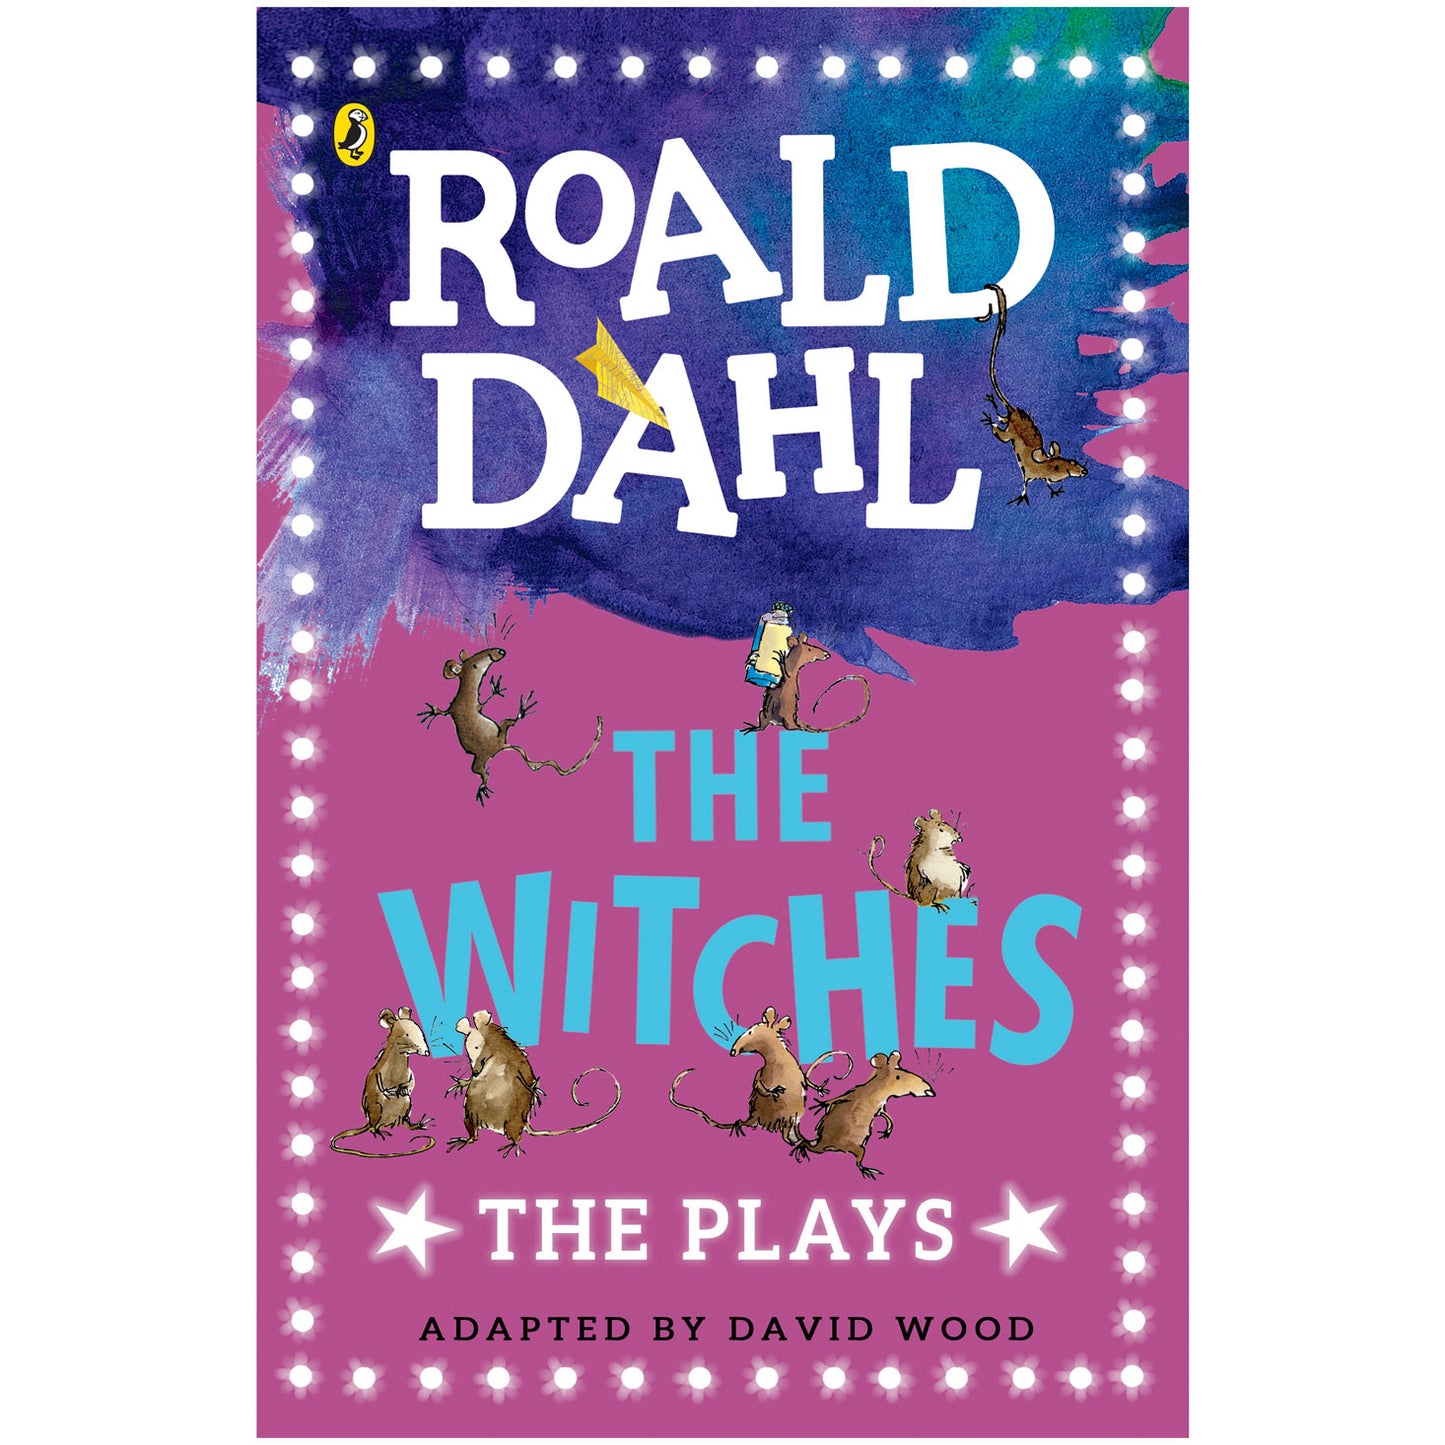 Plays based on Roald Dahl's The Witches and illustrated by Quentin Blake